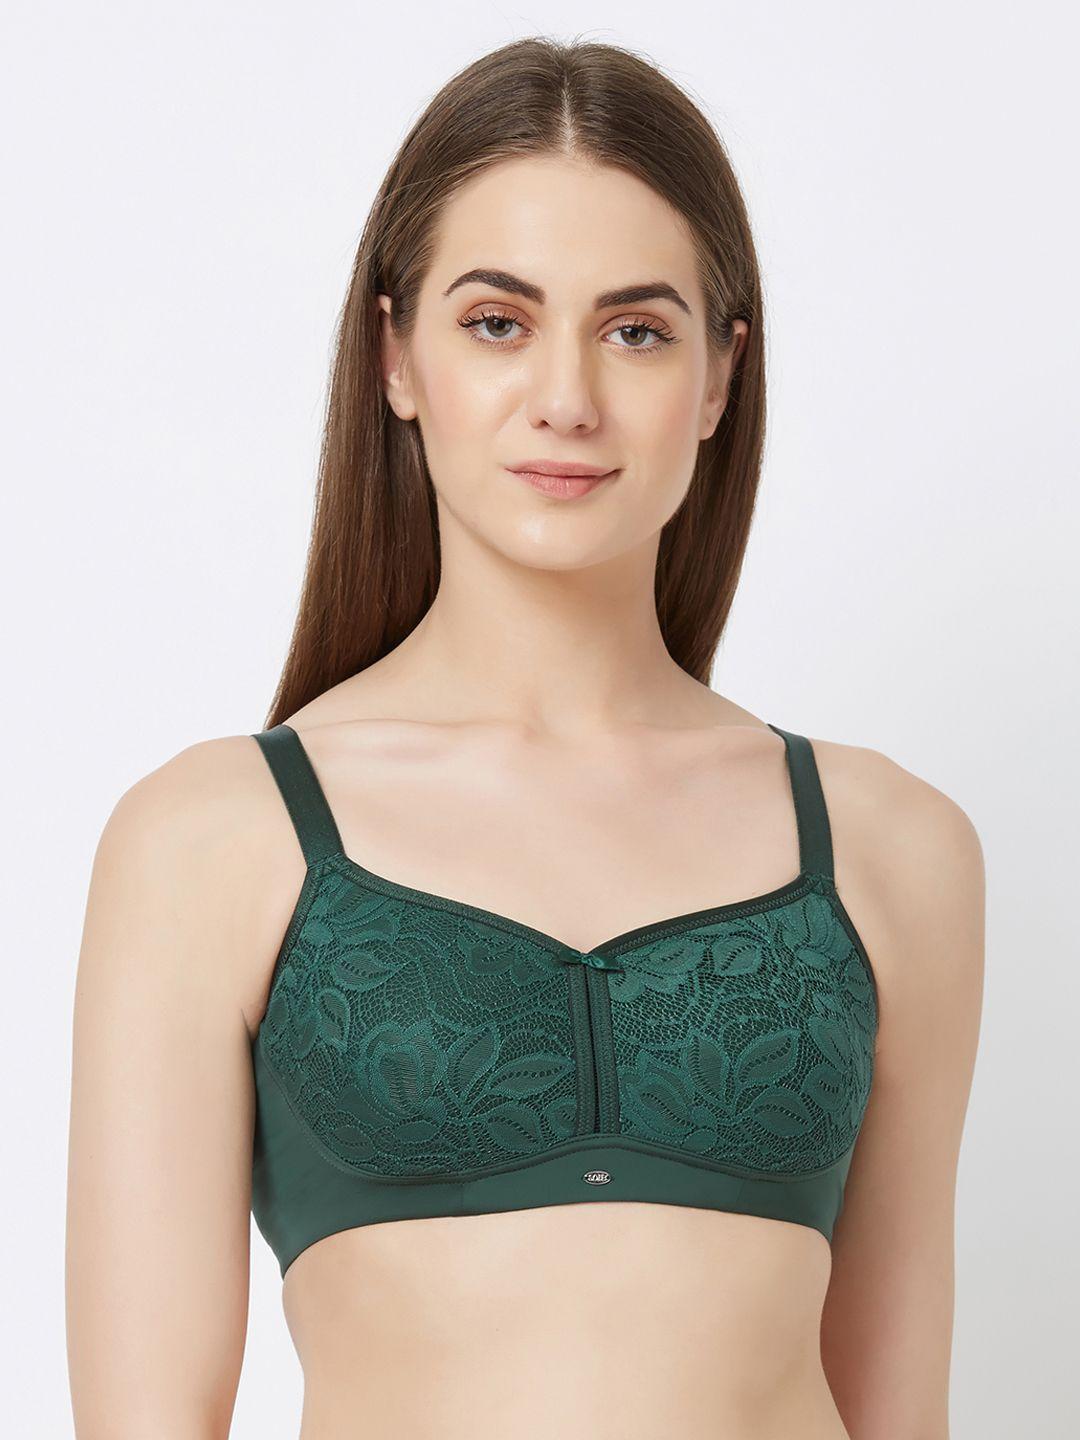 soie-green-lace-non-wired-non-padded-full-coverage-everyday-bra-fb-705